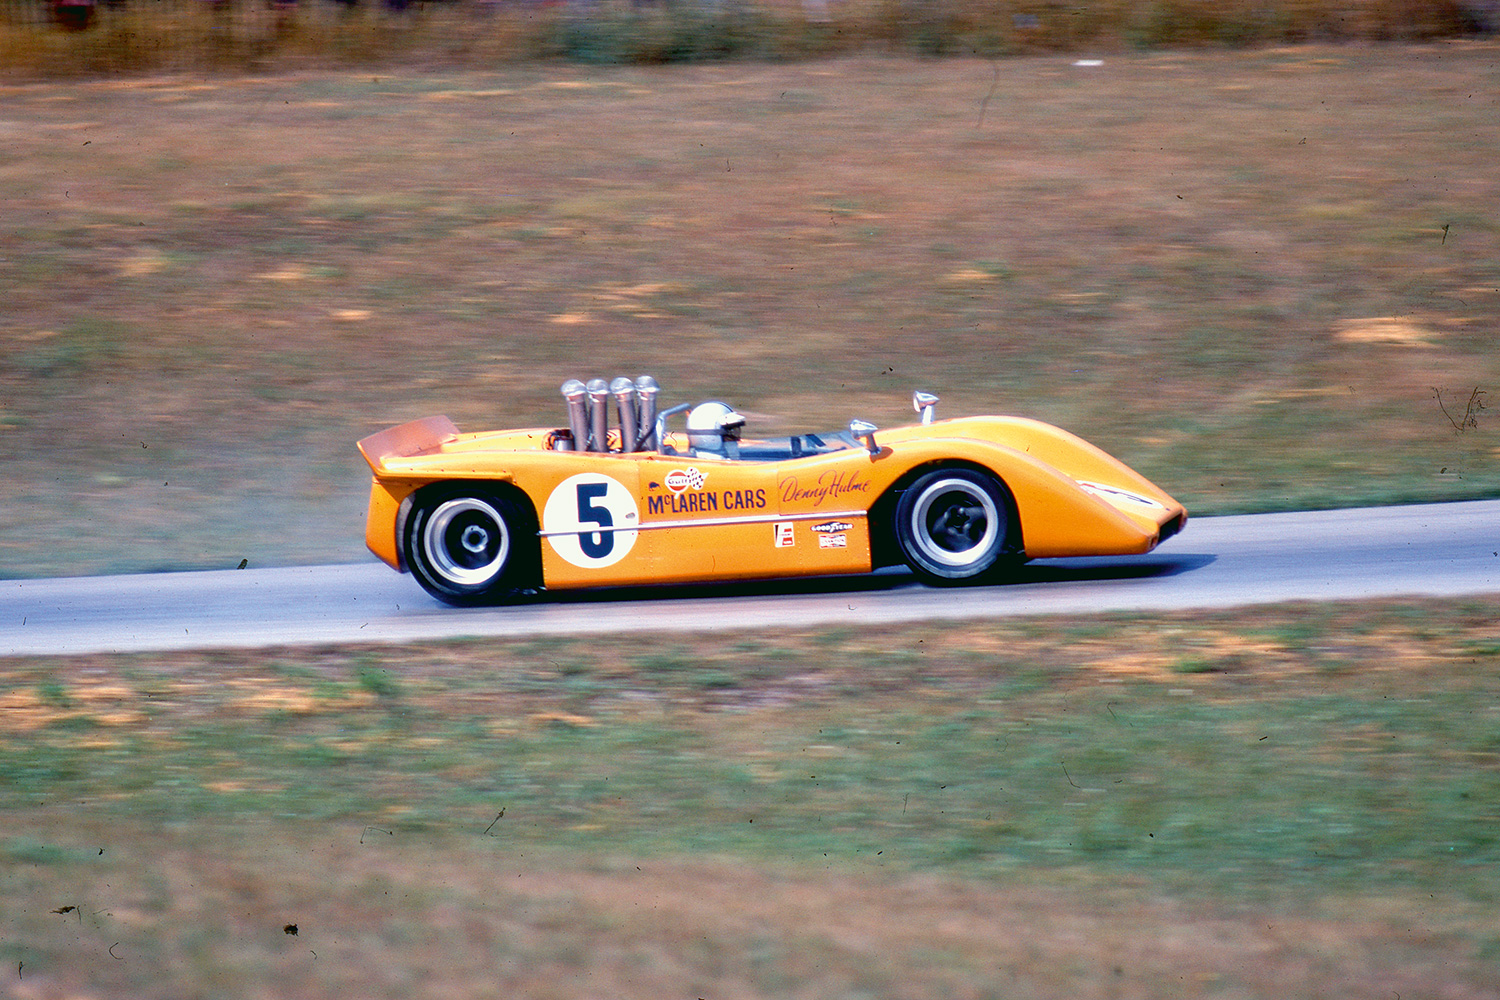 The championship-winning McLaren Can-Am car in action